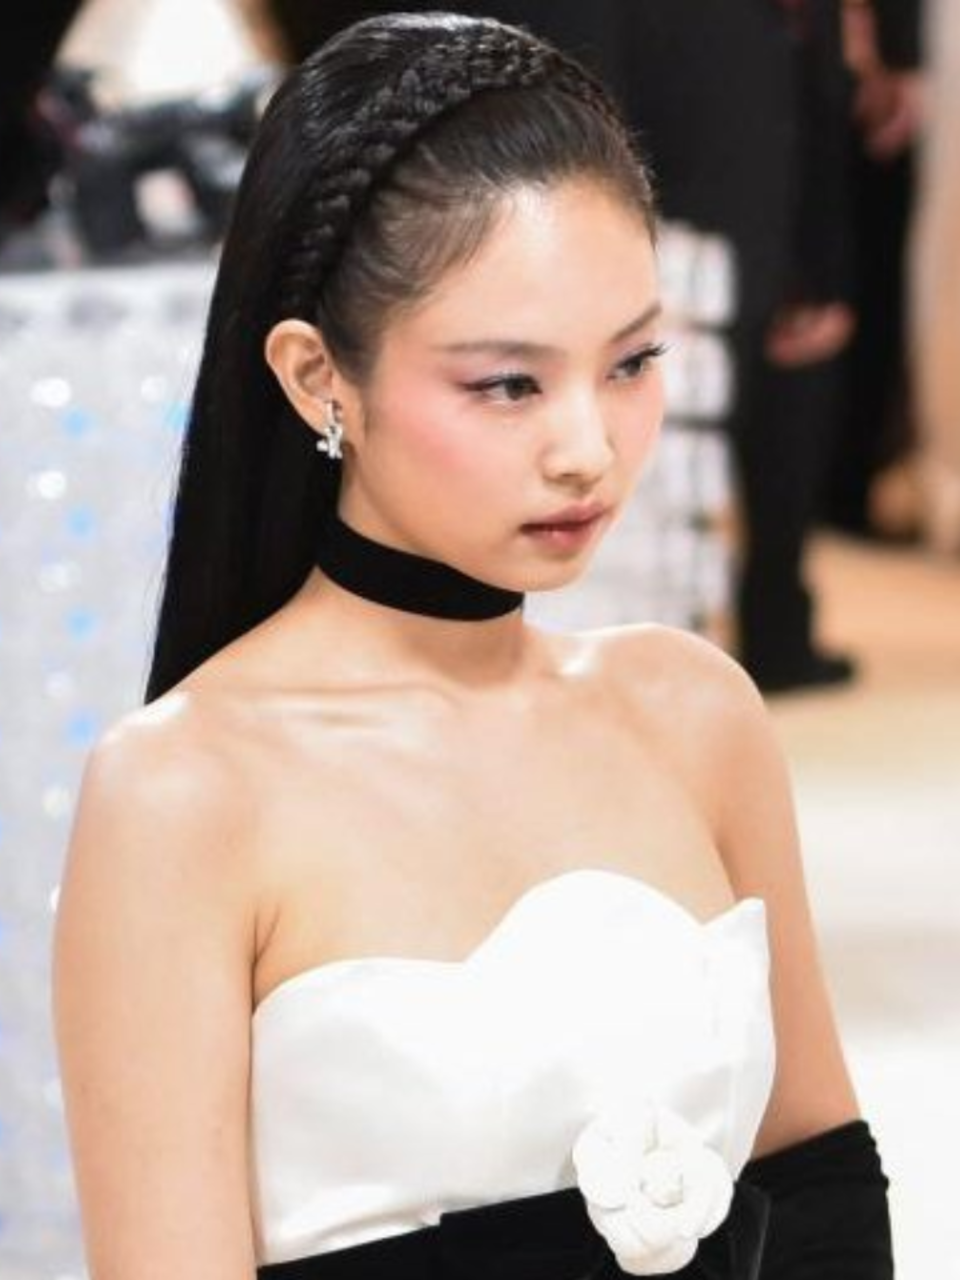 Blackpink's Jennie Transforms Into Human Chanel in a White Minidress for Her  Met Gala Debut